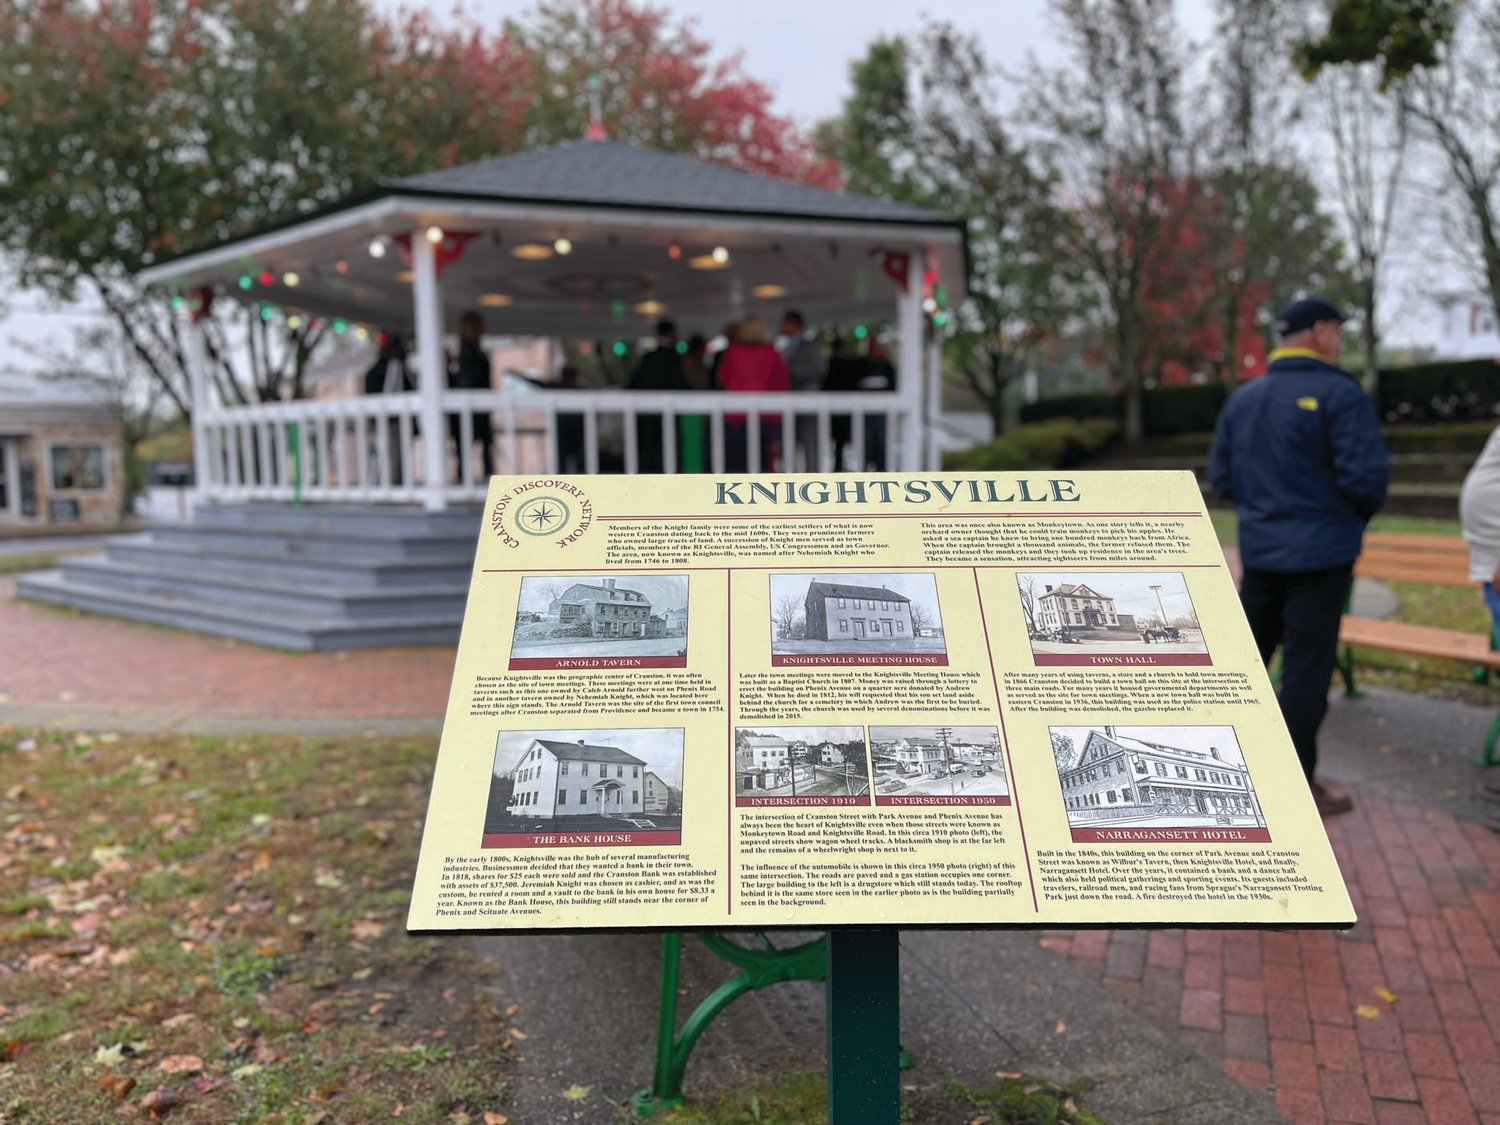 RICH PAST: A Cranston Discovery Network sign near the Knightsville Gazebo highlights historic structures within the area, which has deep ties to Cranston’s sister city of Itri, Italy.